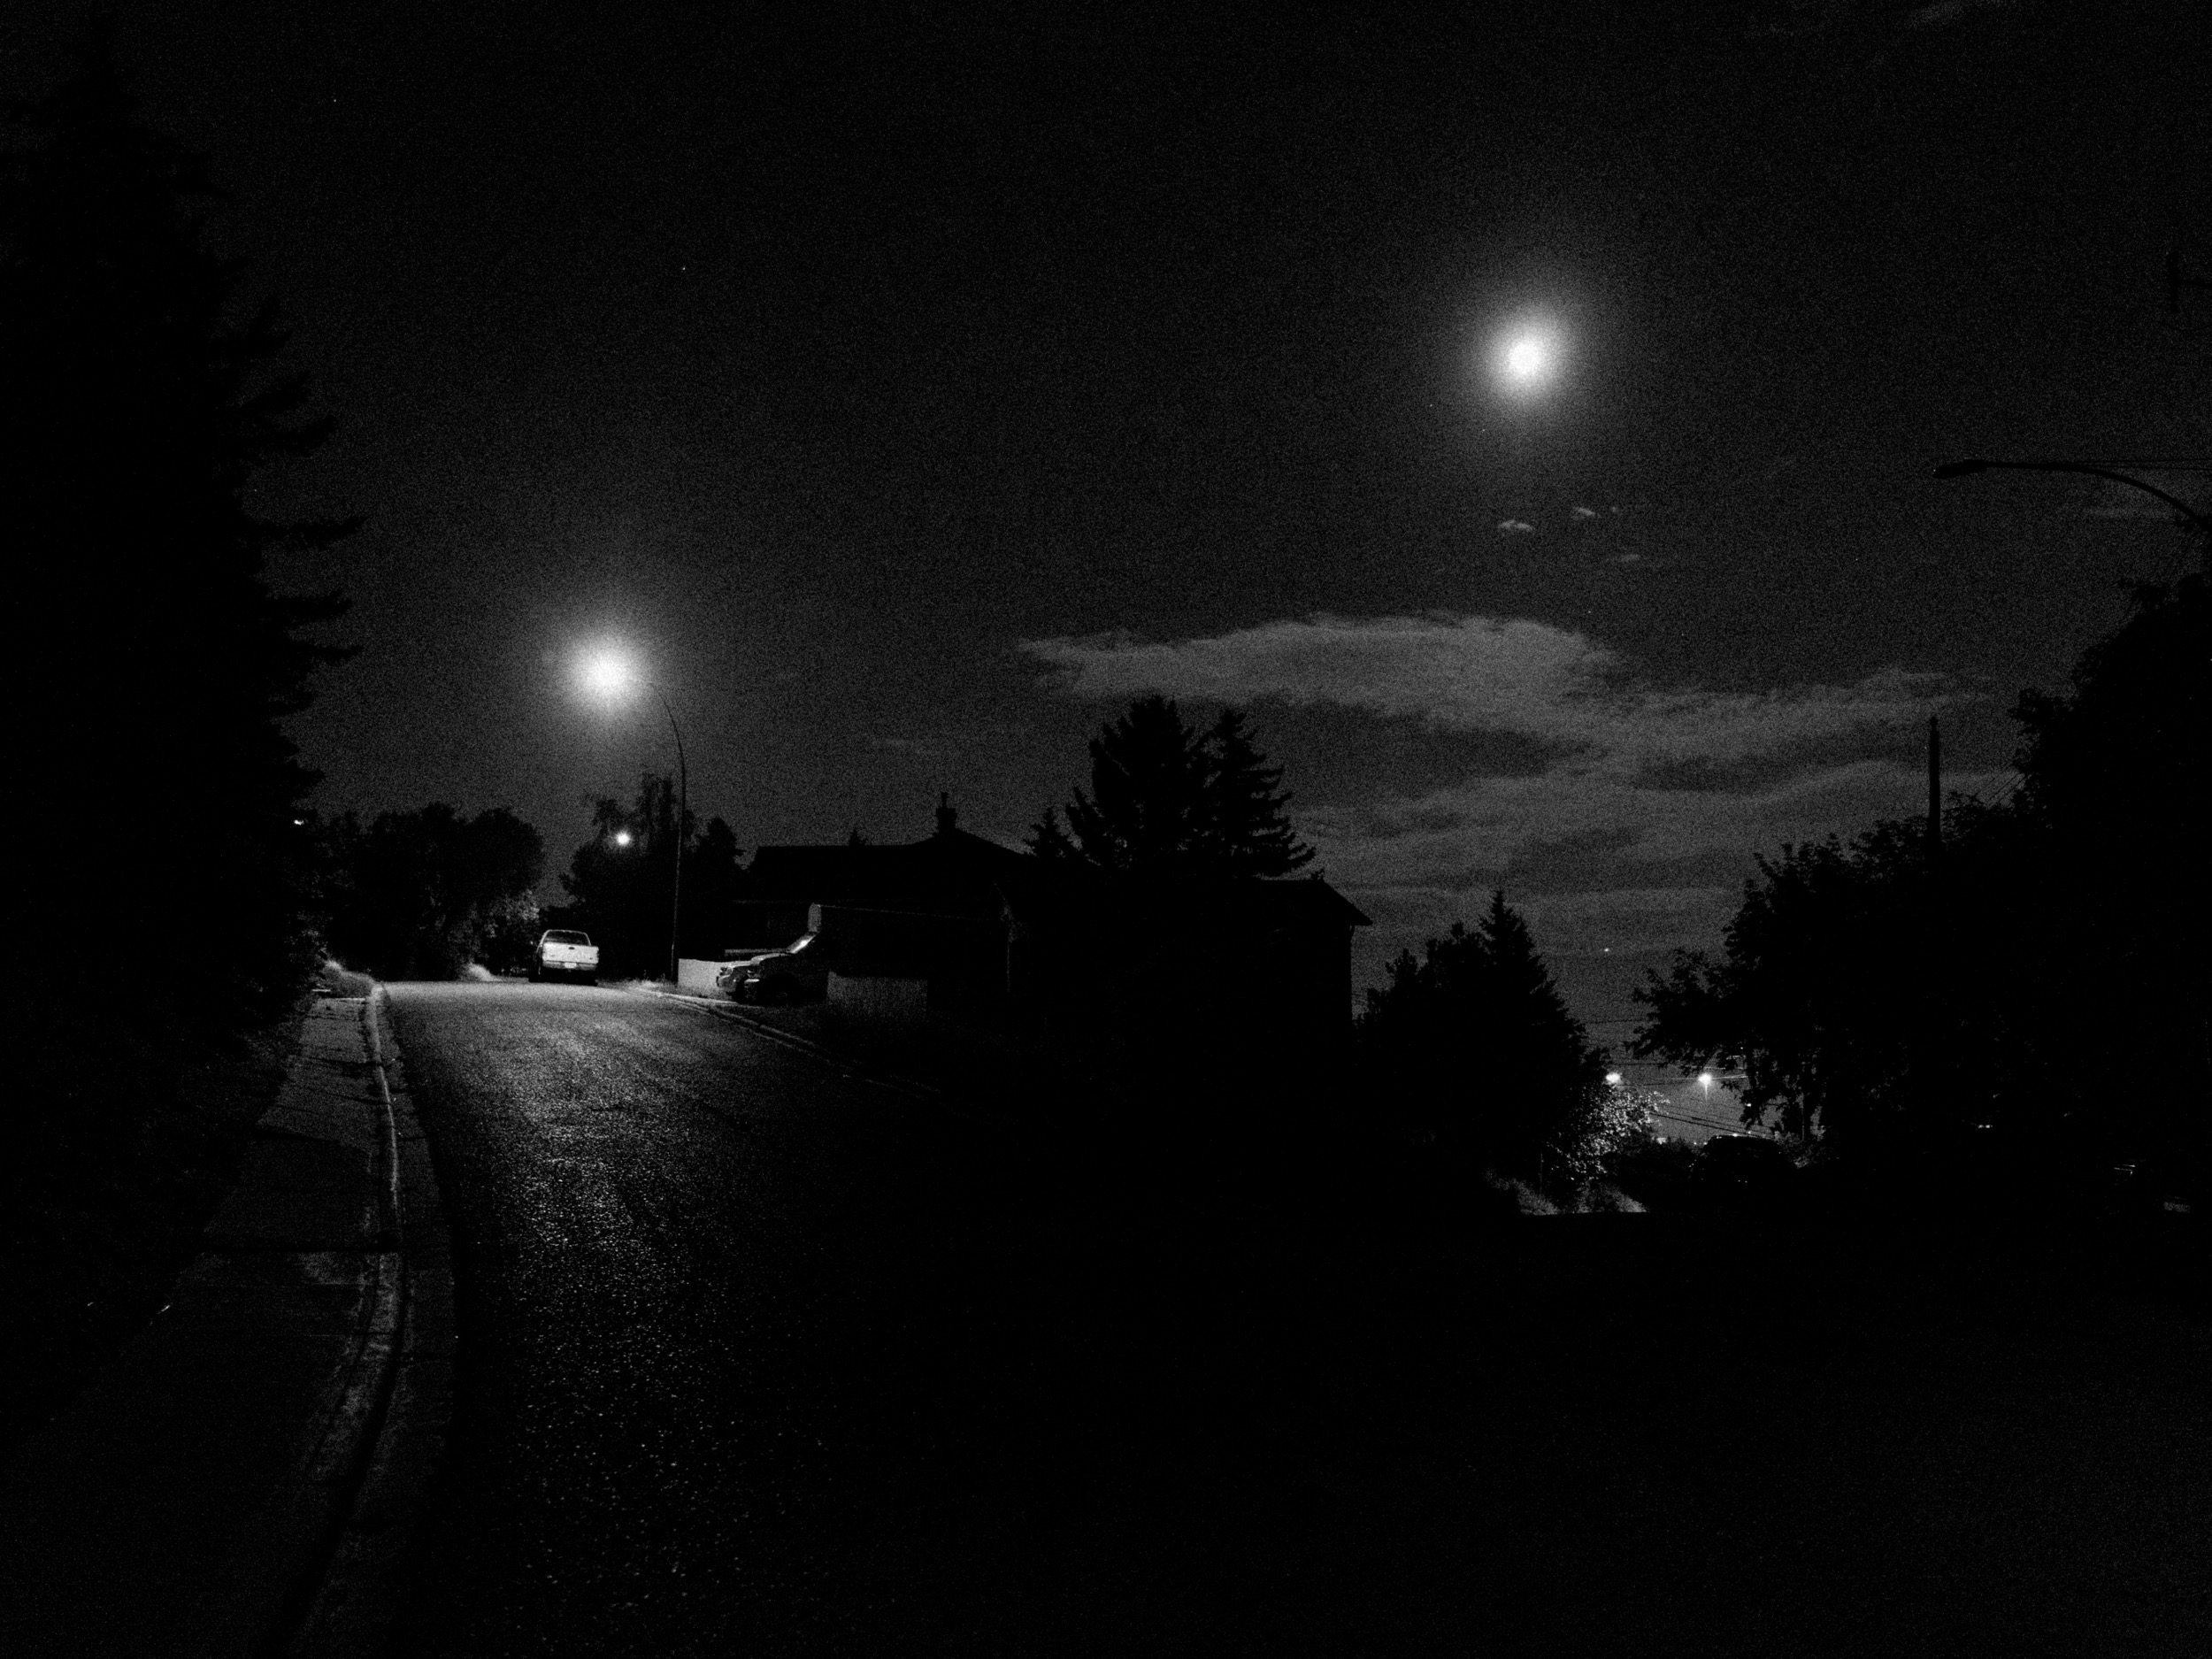  I love how the repetition turned out in this one. The road branches, and on one side is the streetlight and on the other side is the the moon. I recognize the luck in this photo. The moon isn't always in this position and it's an essential part of t